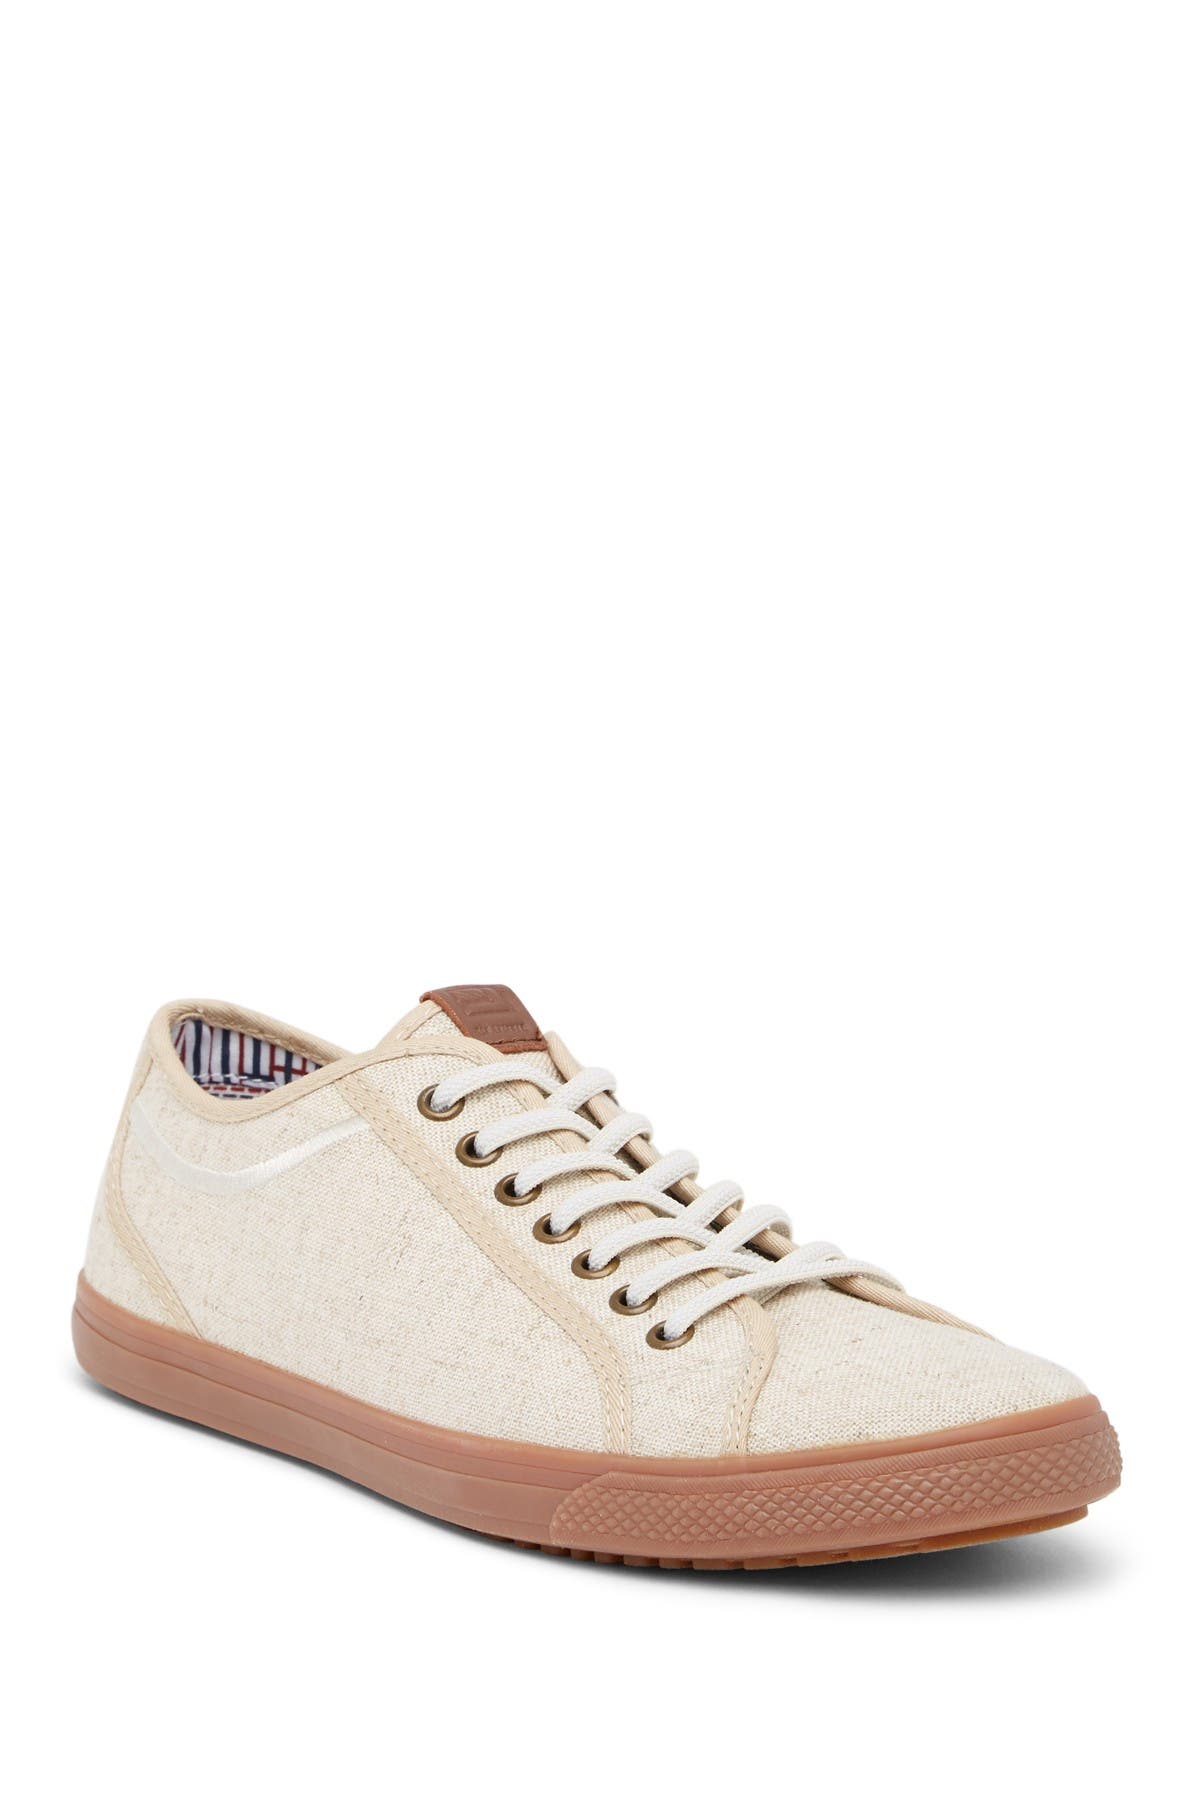 Ben Sherman | Conall Lo Lace-Up Sneaker 